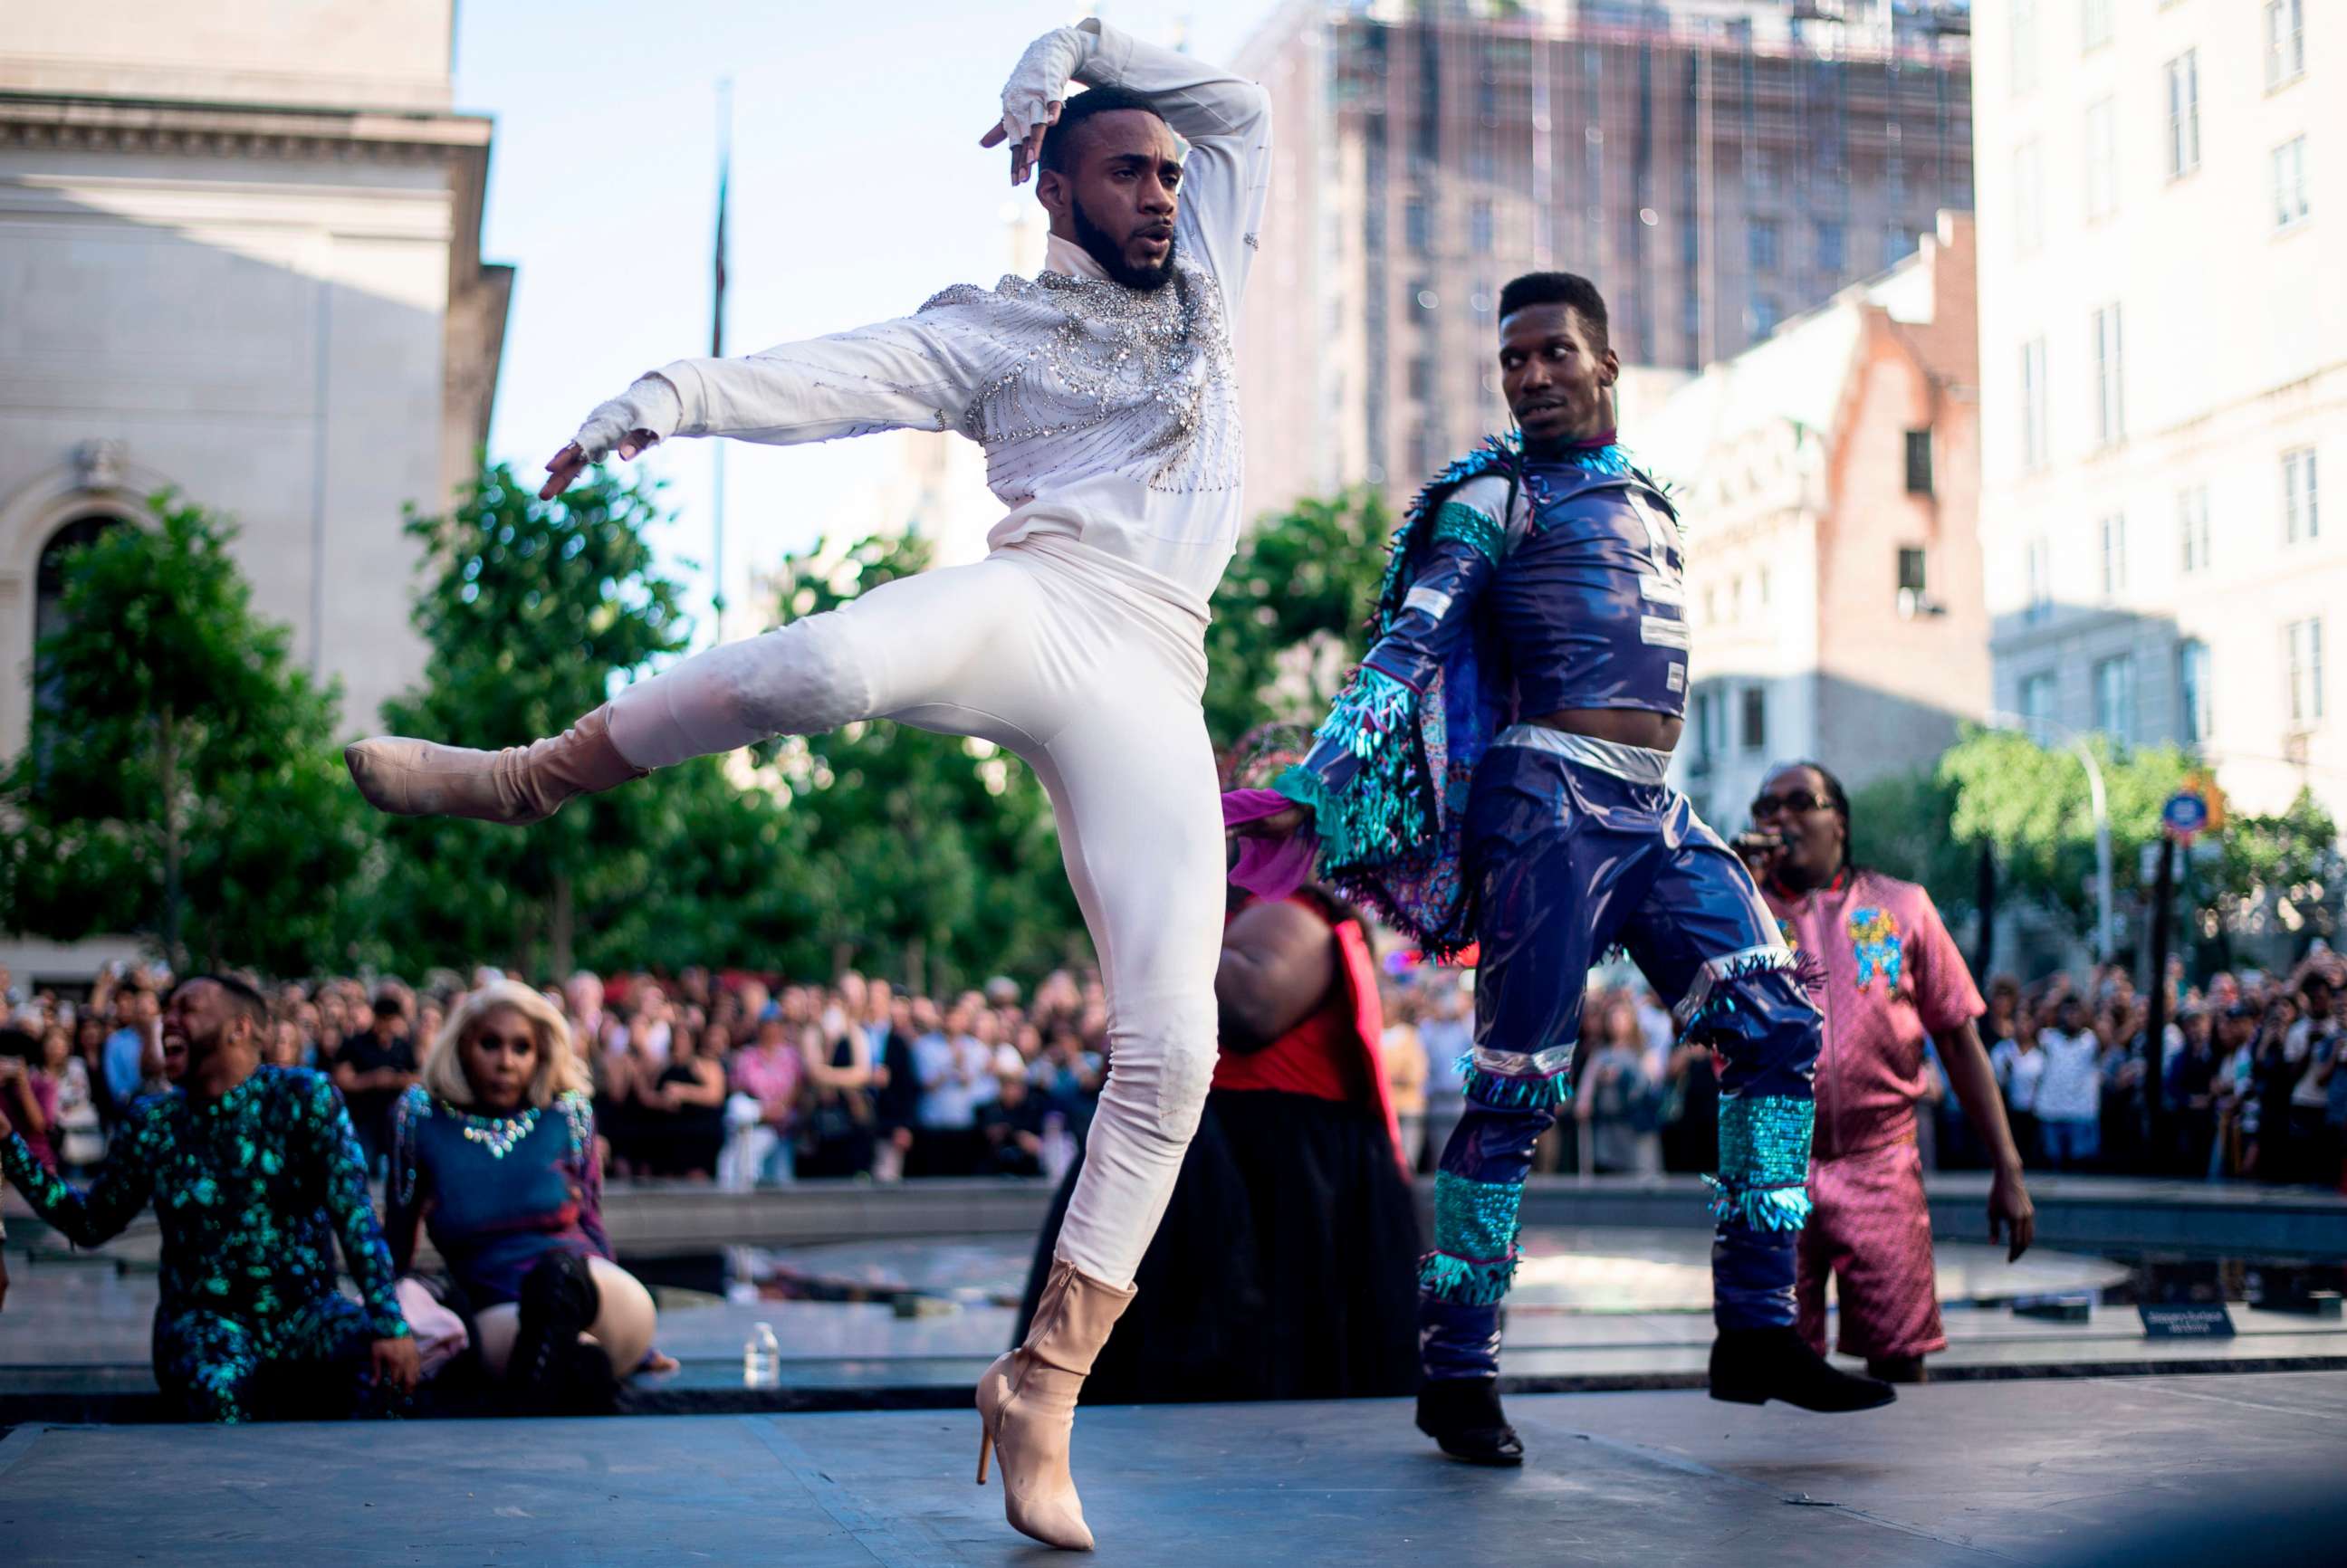 PHOTO: Performers compete during the "Battle of the Legends" vogueing competition outside the Metropolitan Museum of Art, June 11, 2019, in New York City.